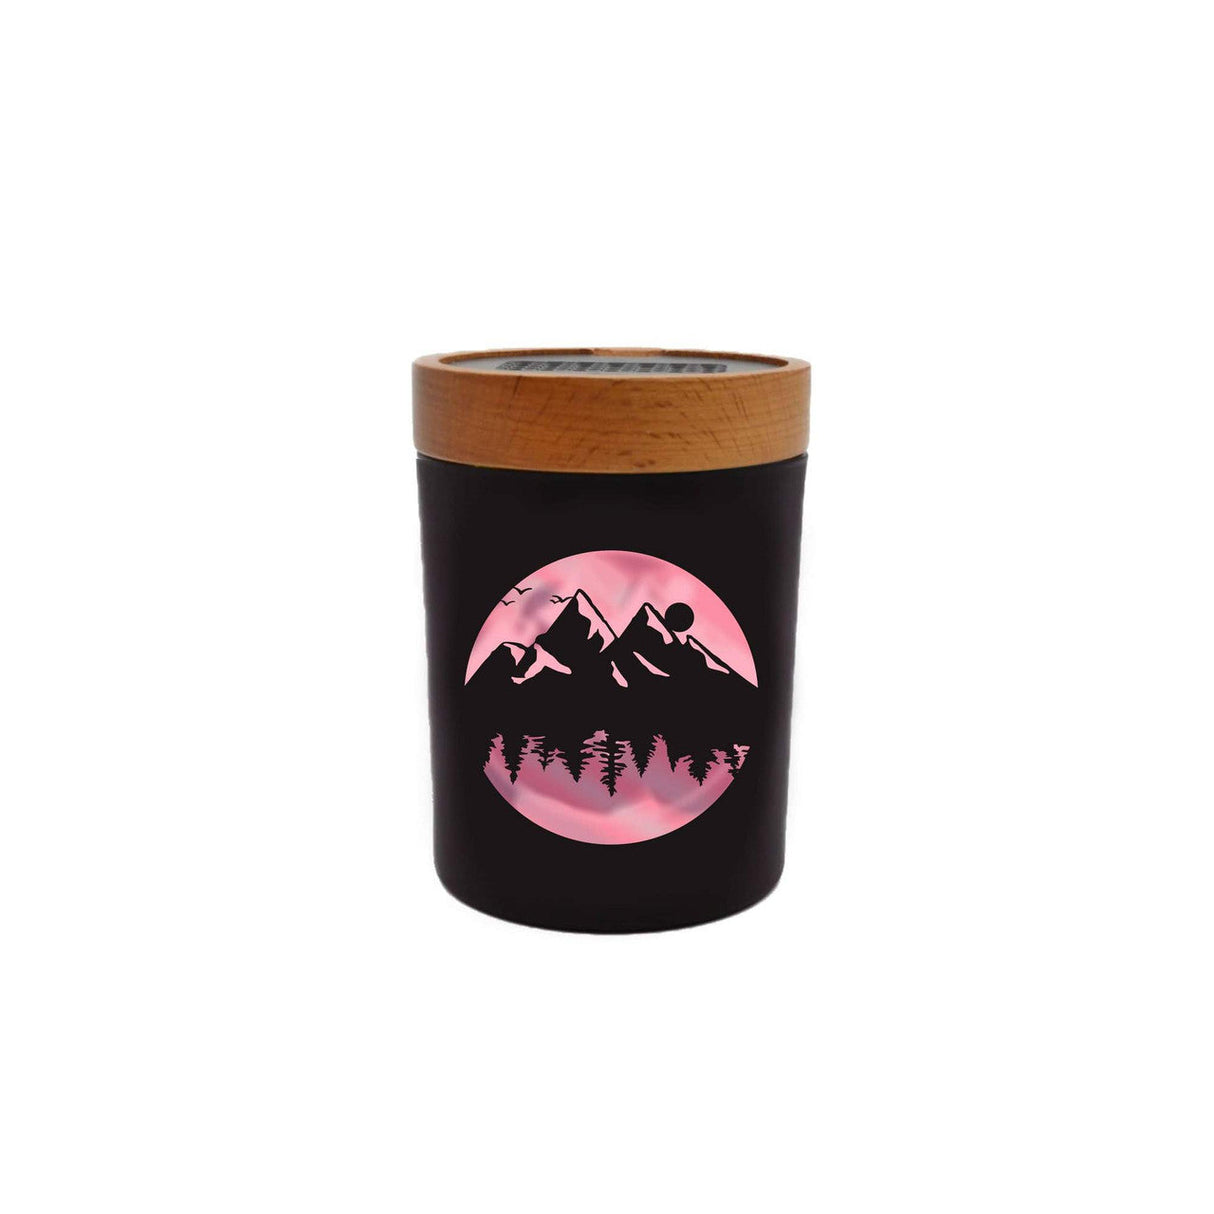 V Syndicate Smart Stash Jar Medium in High Elevation Pink with Wood Lid - Front View